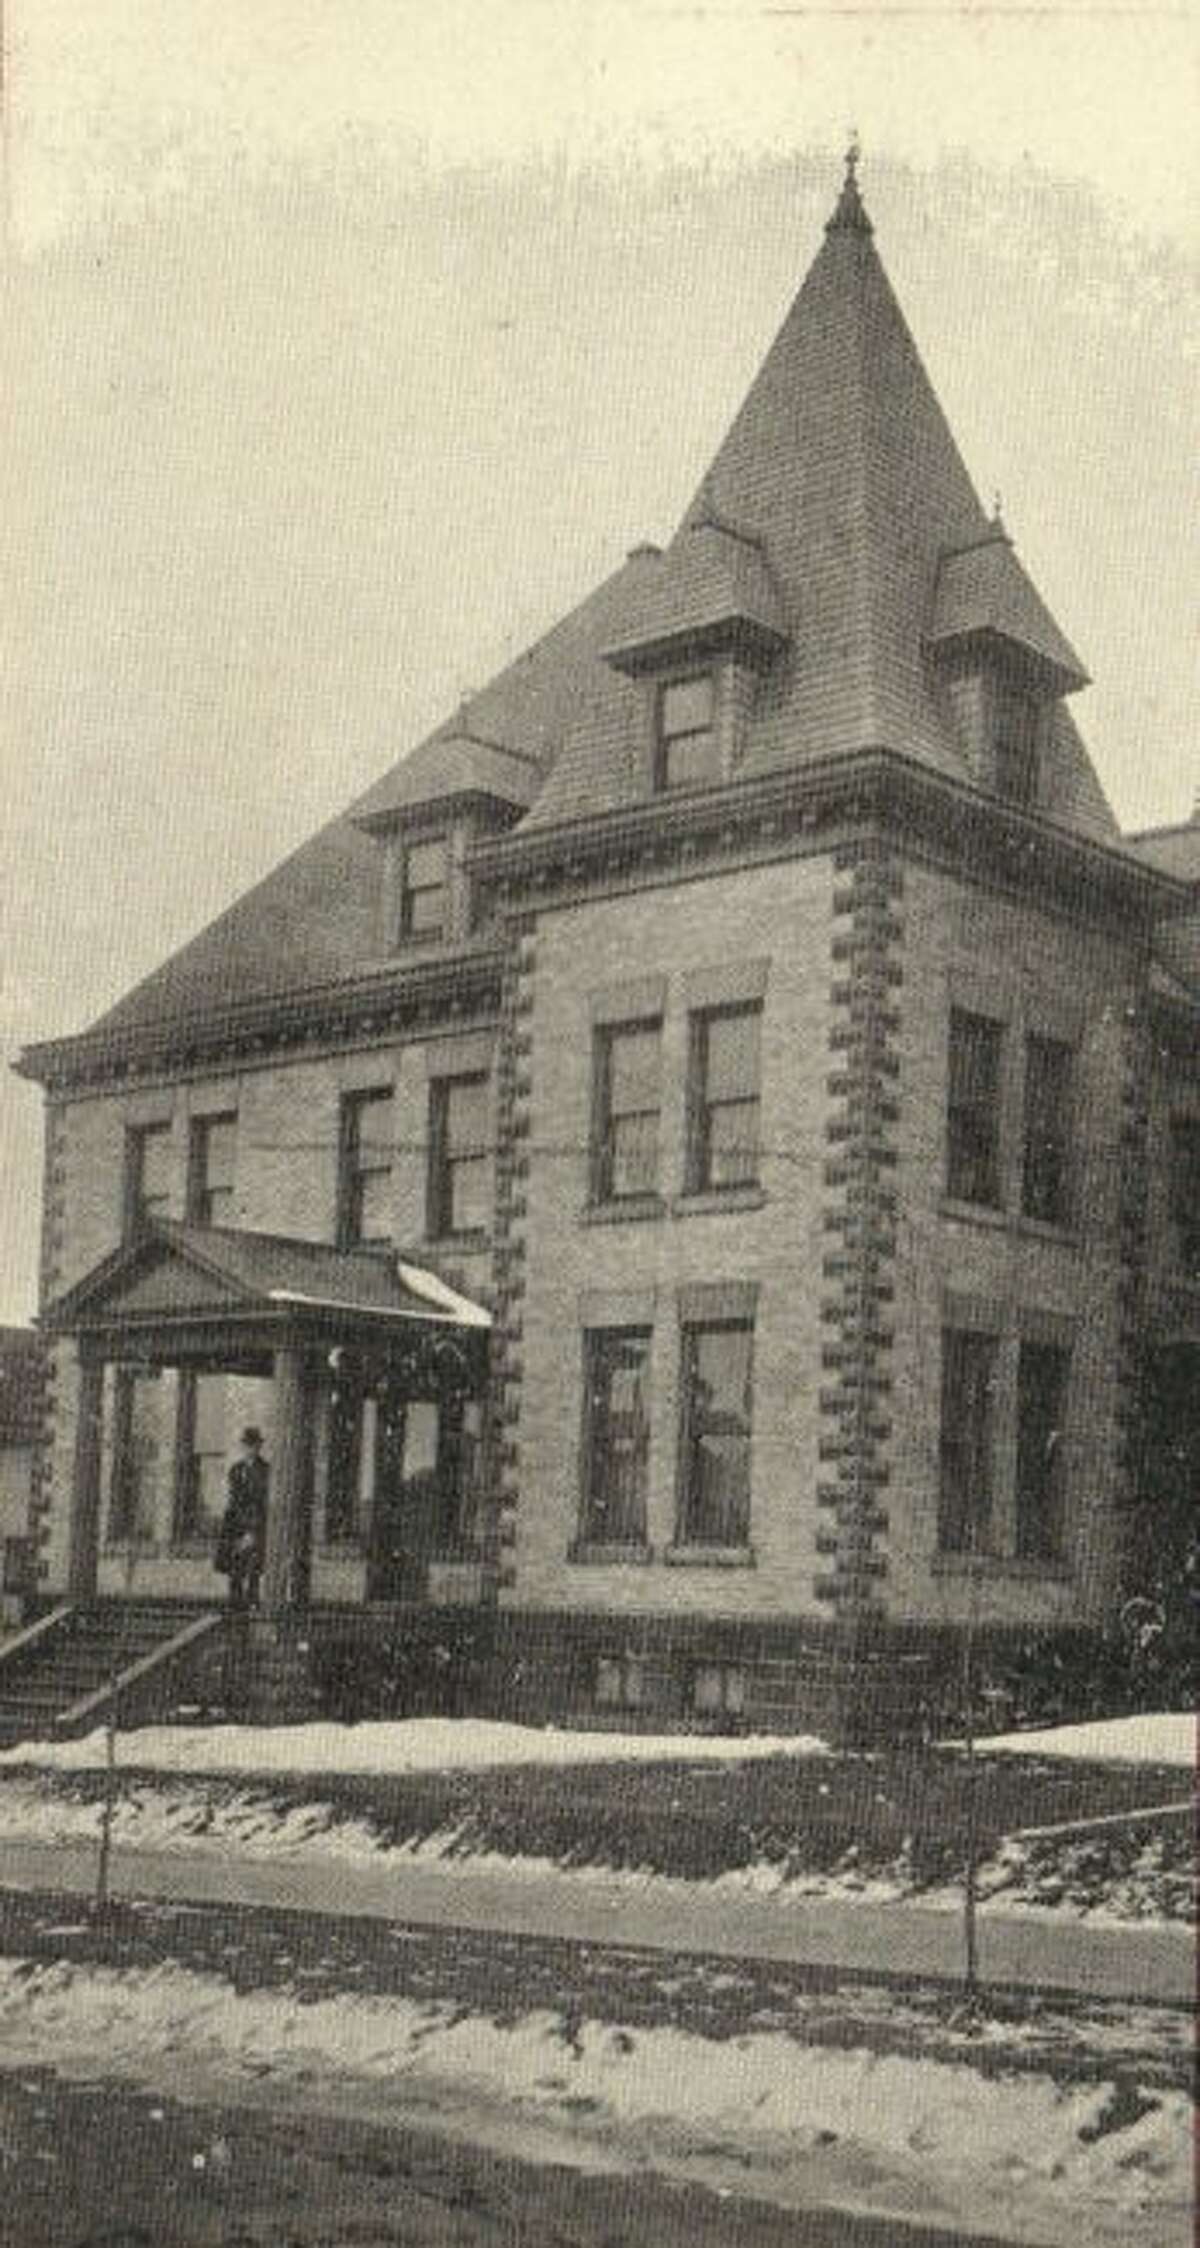 The Guardian Angels parsonage is shown in this photograph that was taken in the early 1900s.